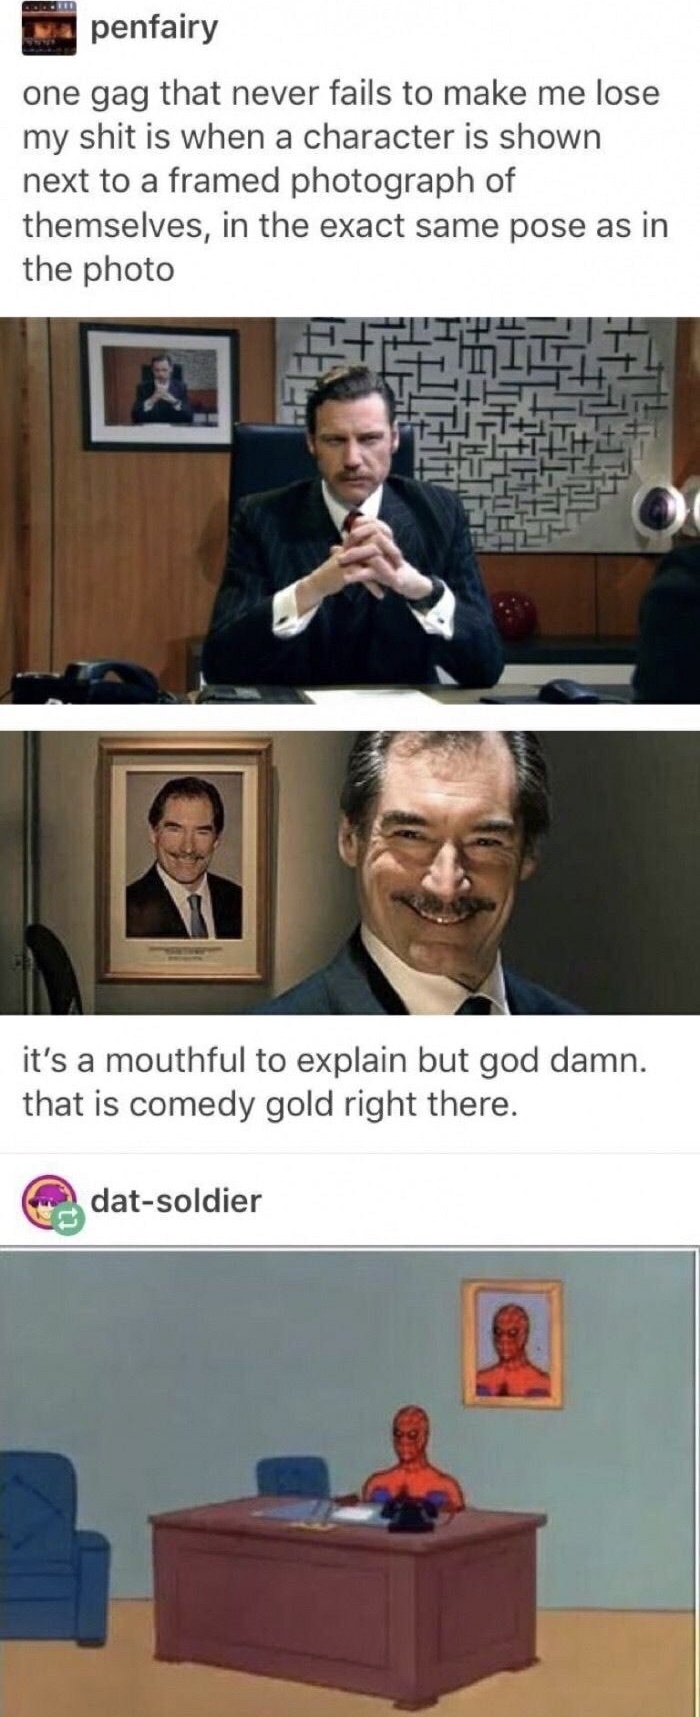 one gag that never fails to make me lose my shit is when a character is shown next to a framed photograph of themselves in the exact same position as the photo - penfairy one gag that never fails to make me lose my shit is when a character is shown next t